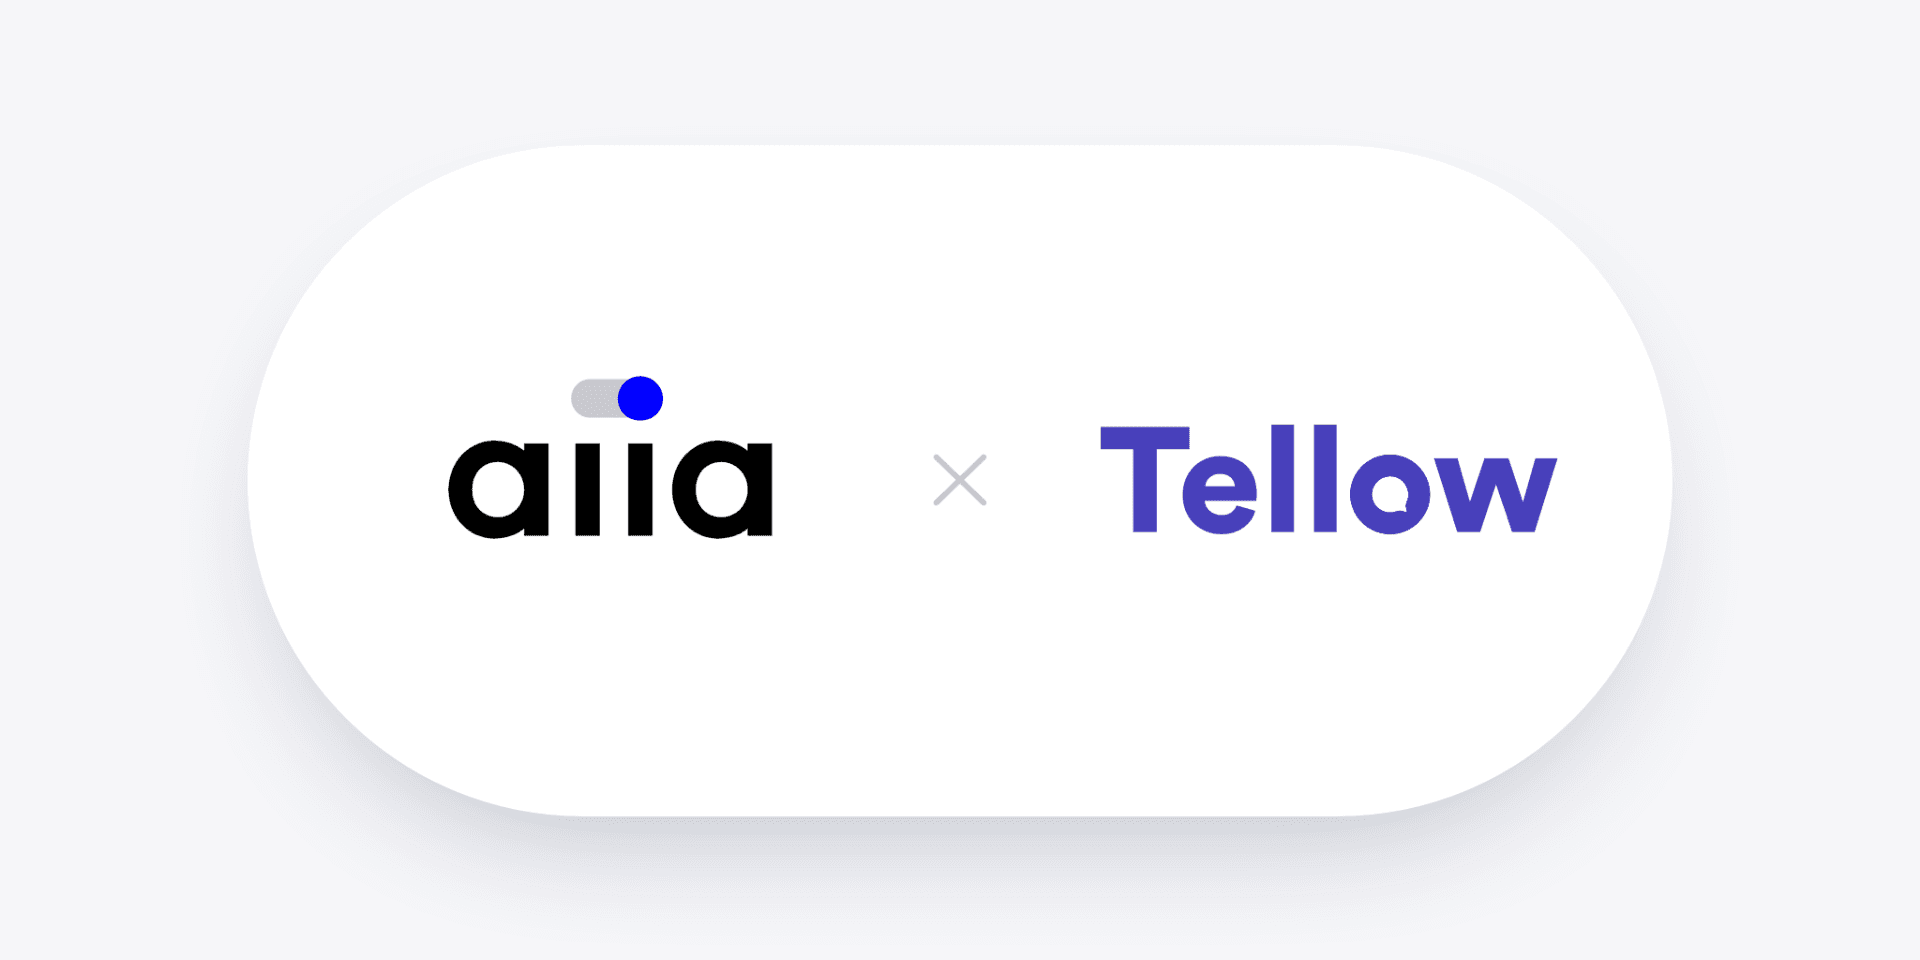 Tellow's End Expansion